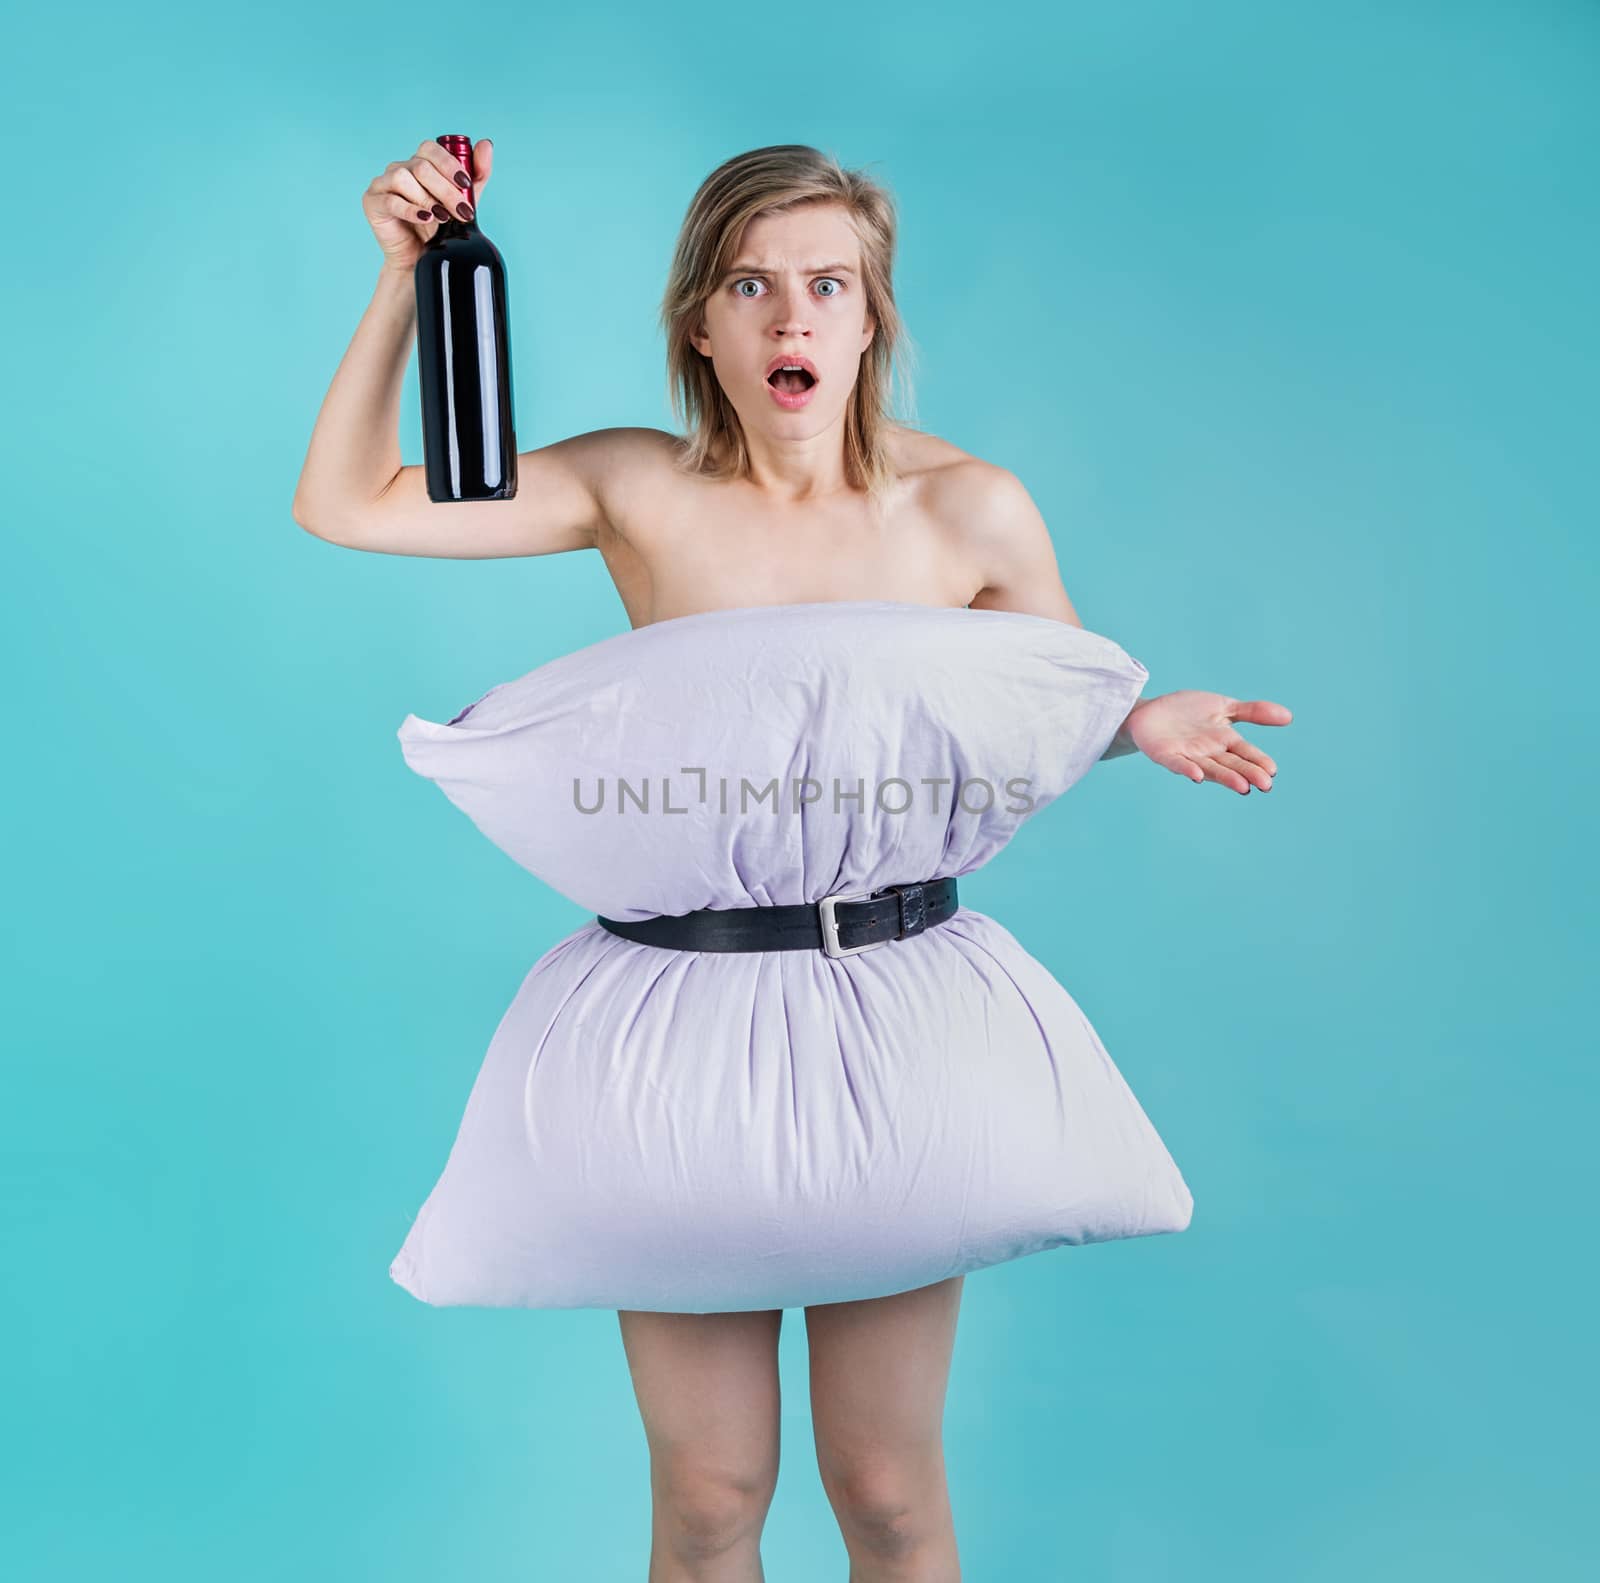 Coronavirus quarantine. Crazy quarantine. Angry and surprised woman in pillowdress holding a wine bottle isolated on blue background. Pillow challenge